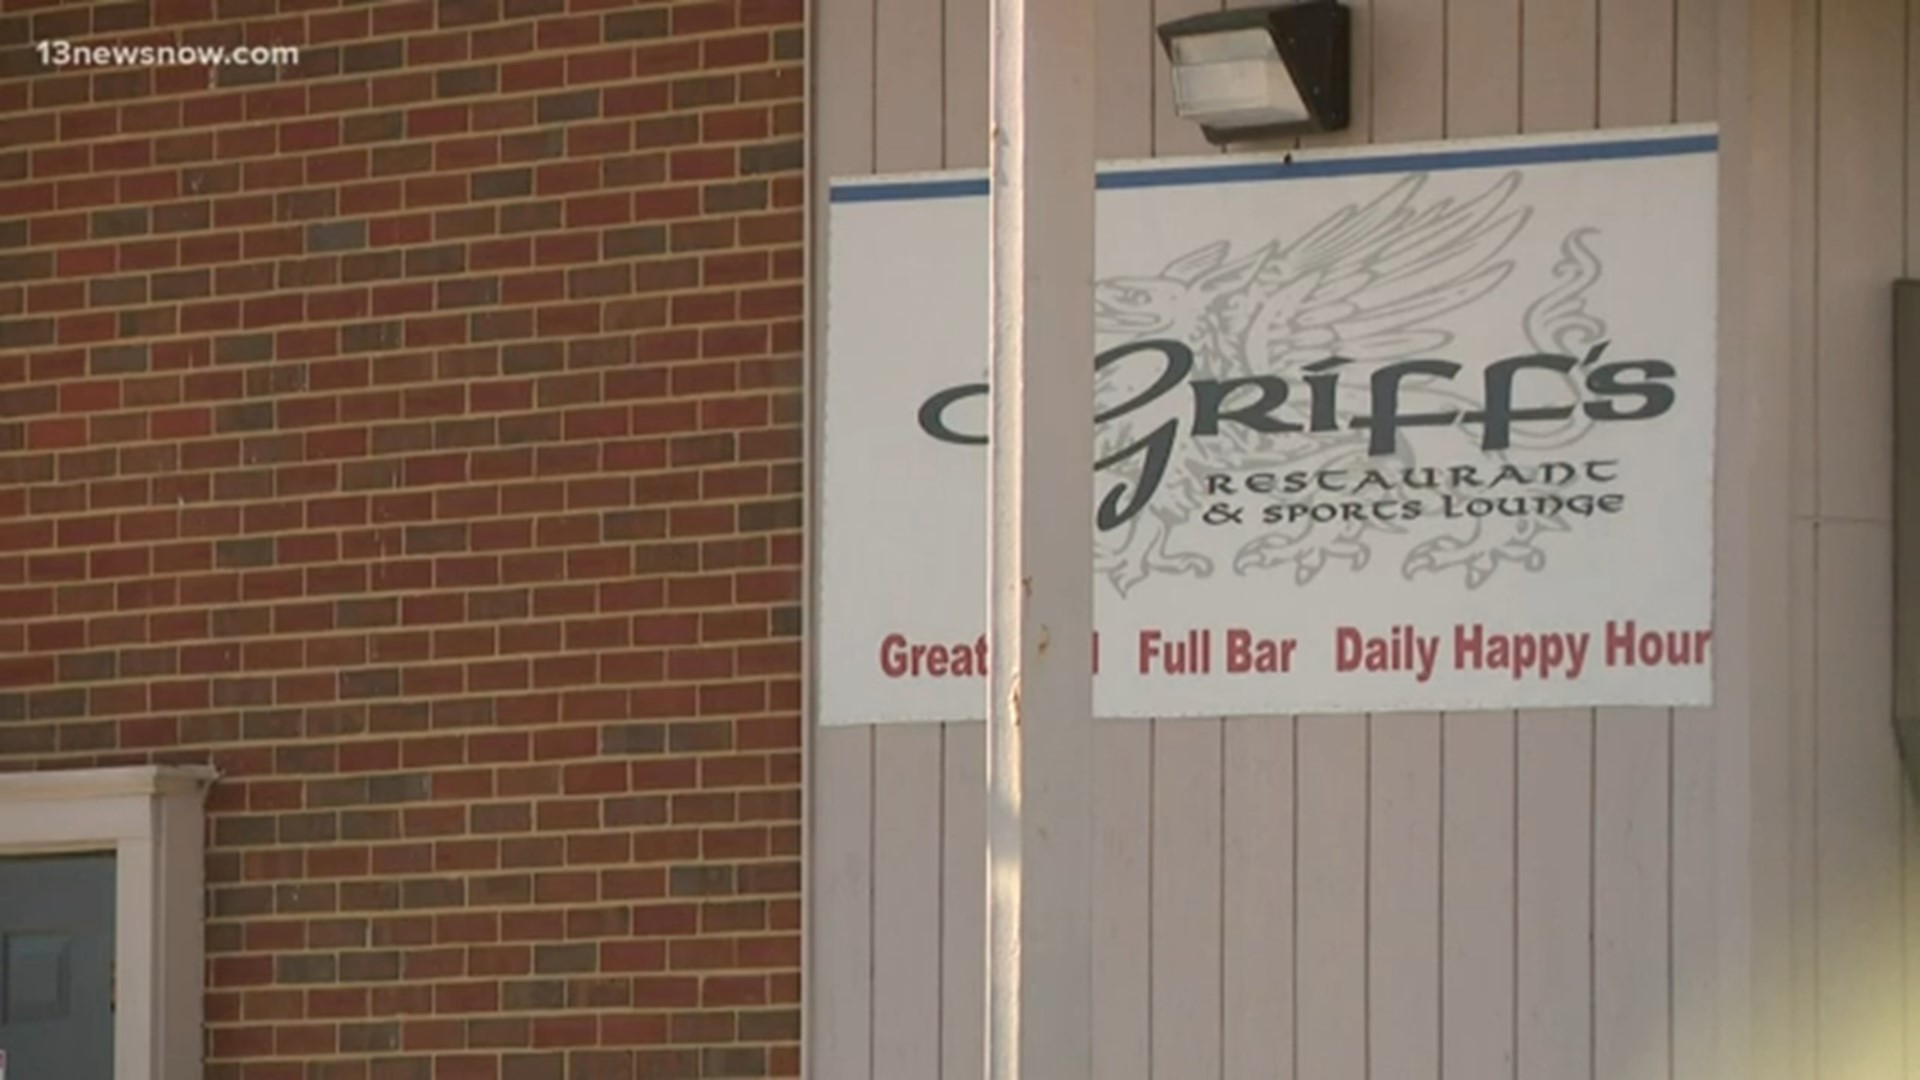 Officers said the shooting happened at Griff's Restaurant and Sports Lounge, located at 4245 Portsmouth Boulevard.